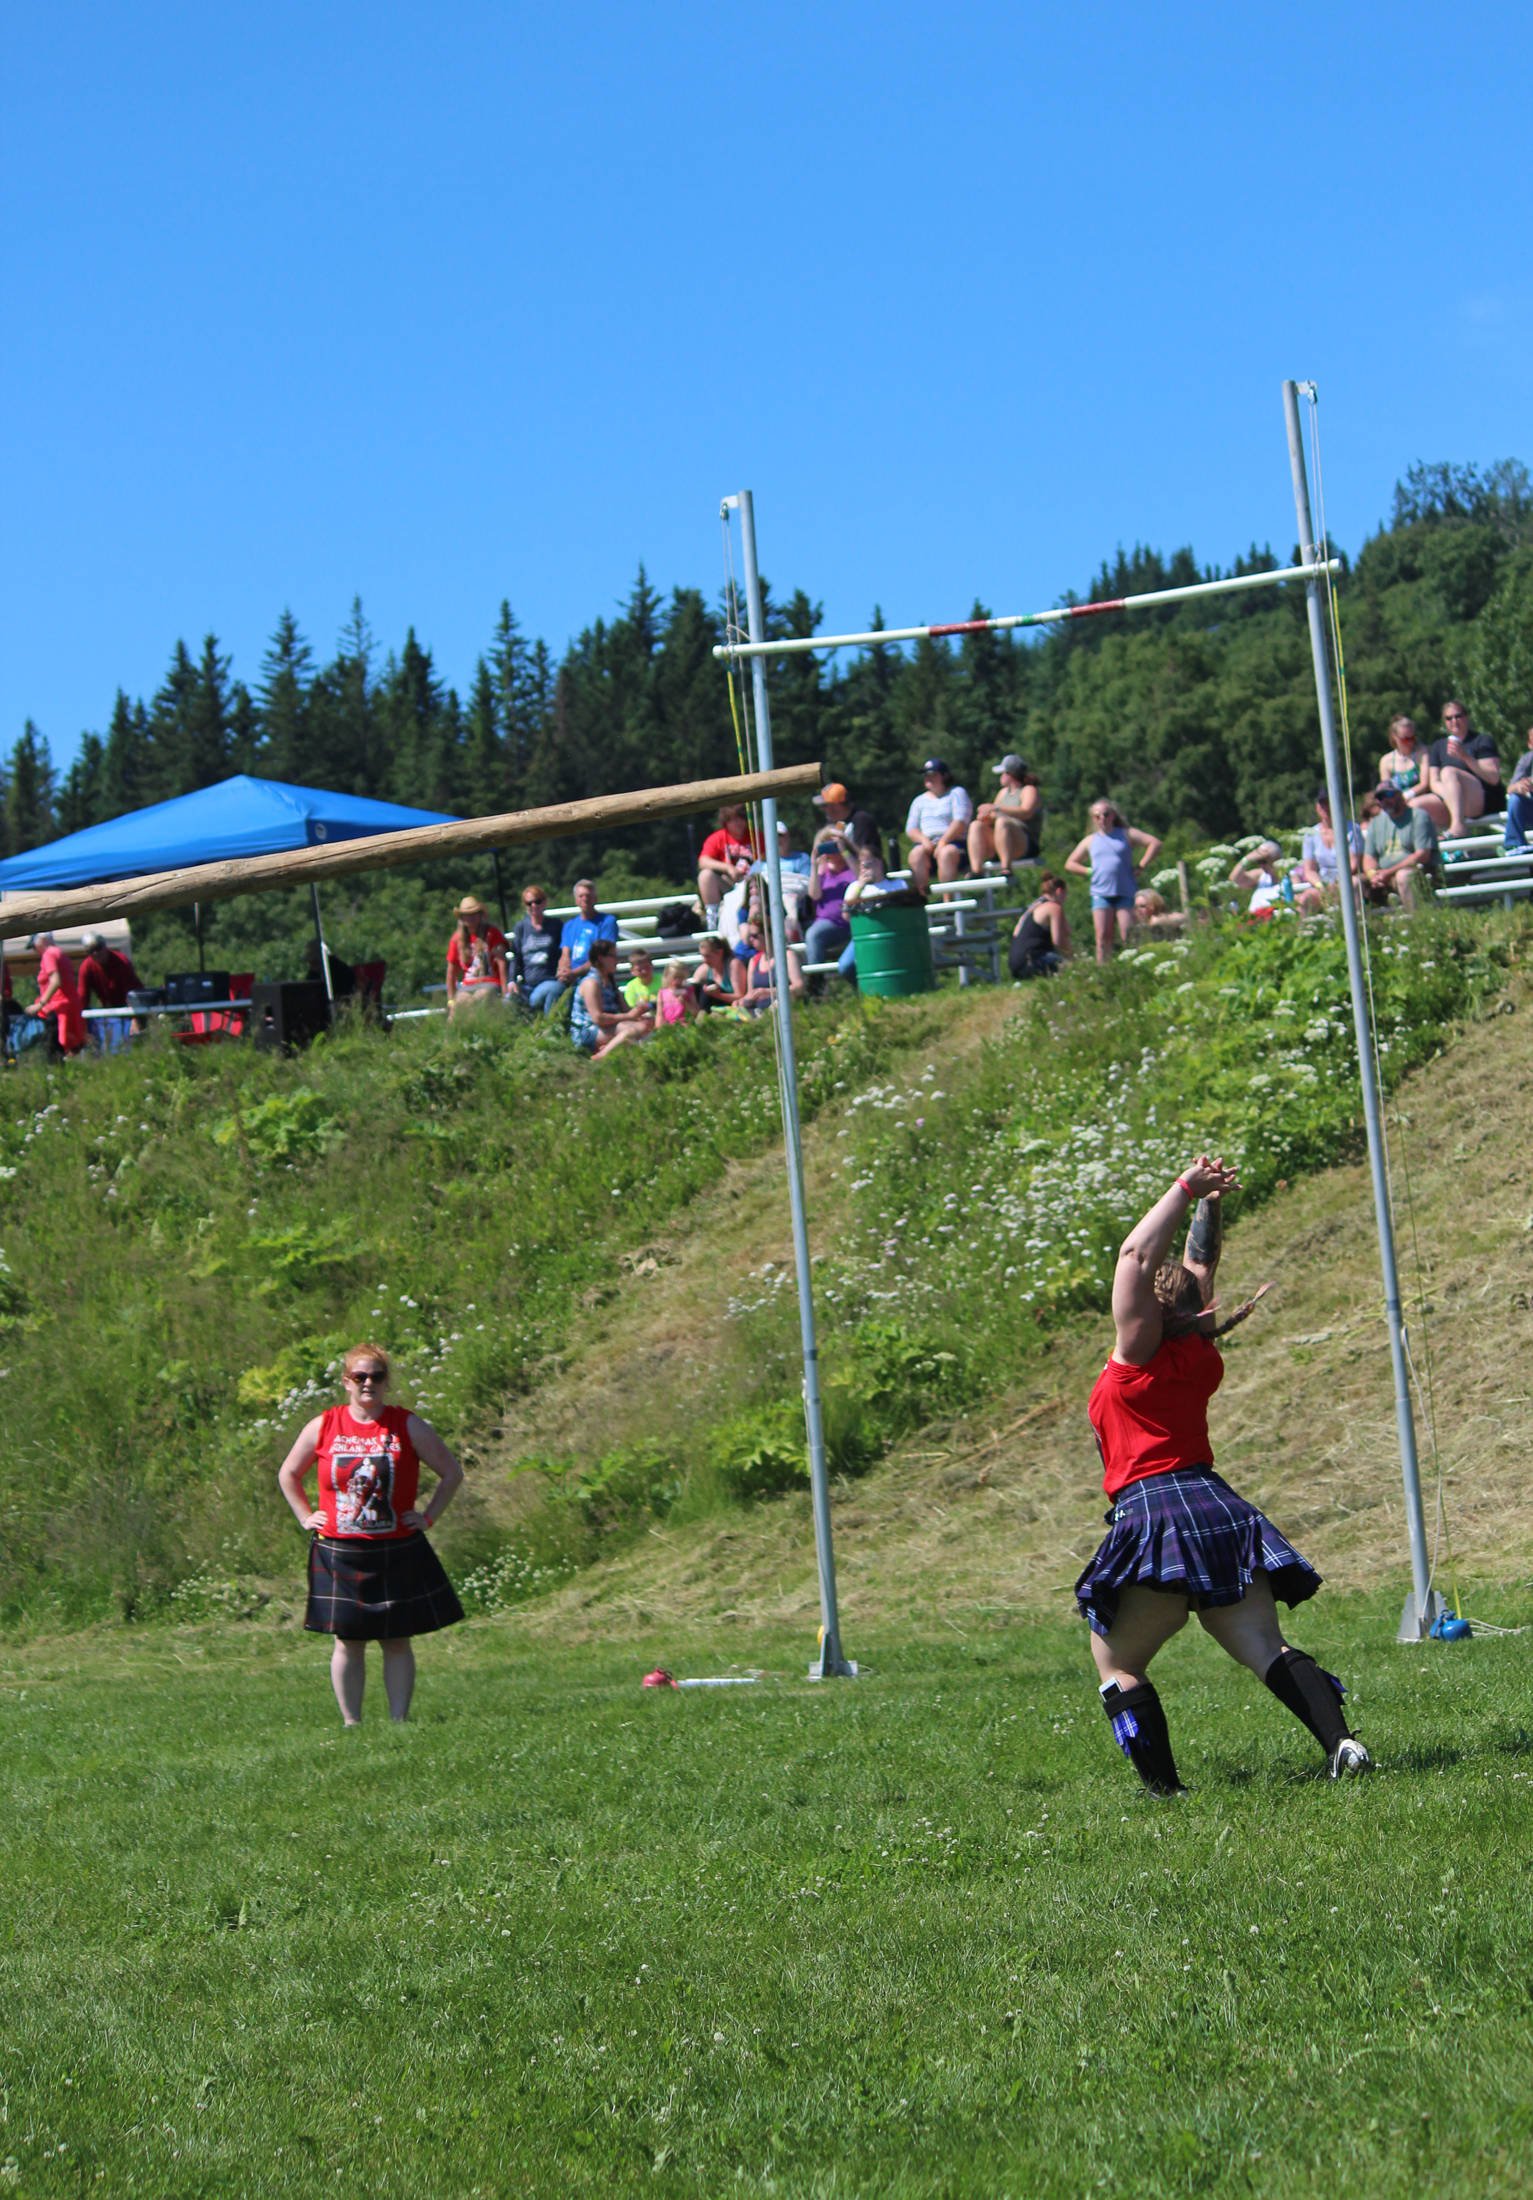 Sherri Borchert of Anchorage launches a caber into the air during the women’s caber toss at this year’s Kachemak Bay Highland Games on Saturday, July 7, 2018 at Karen Hornaday Park in Homer, Alaska. (Photo by Megan Pacer/Homer News)